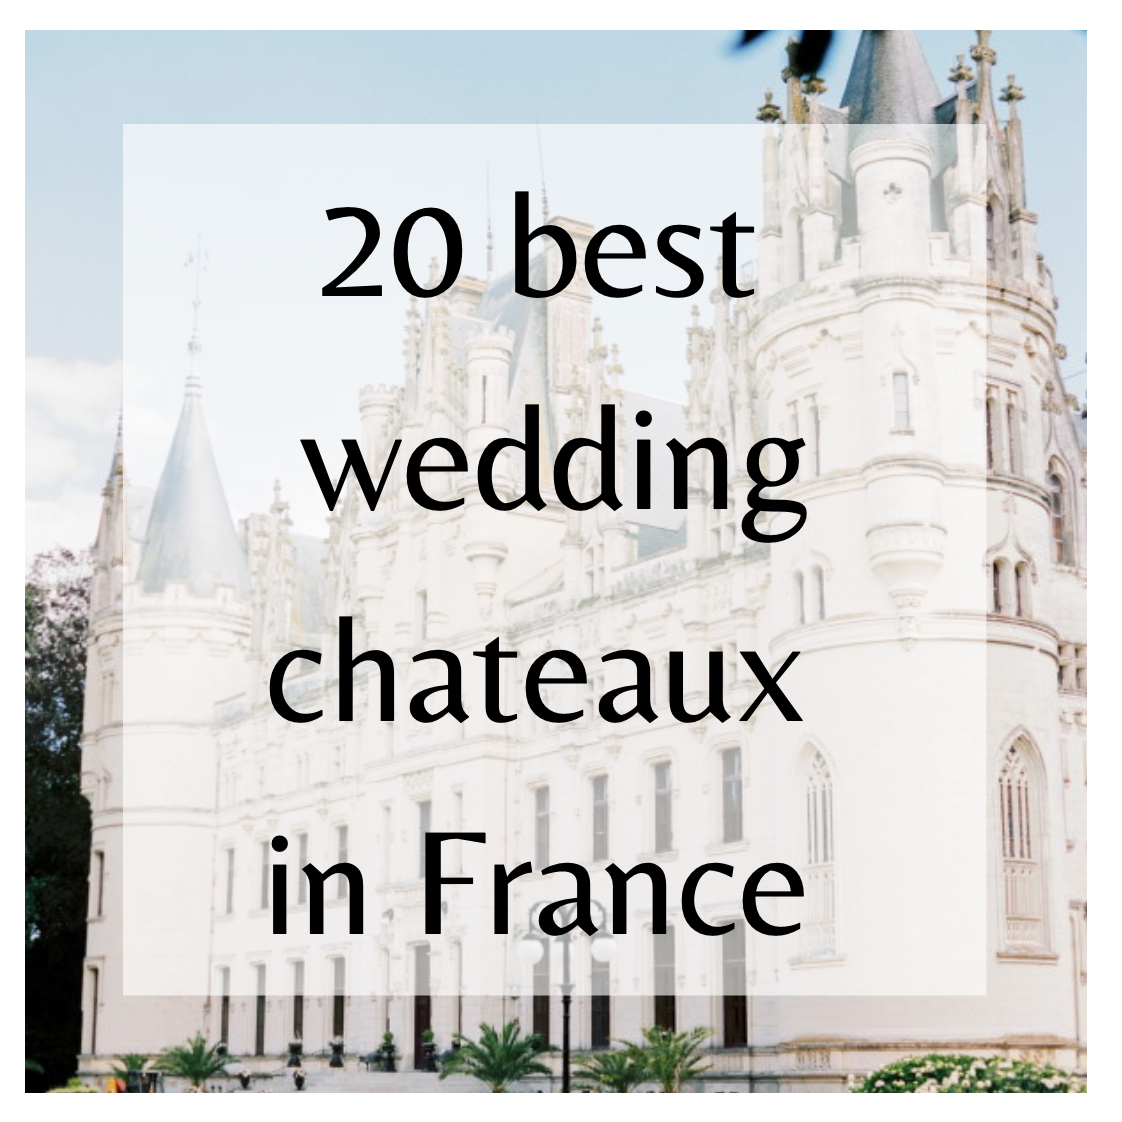 Best chateaux in france